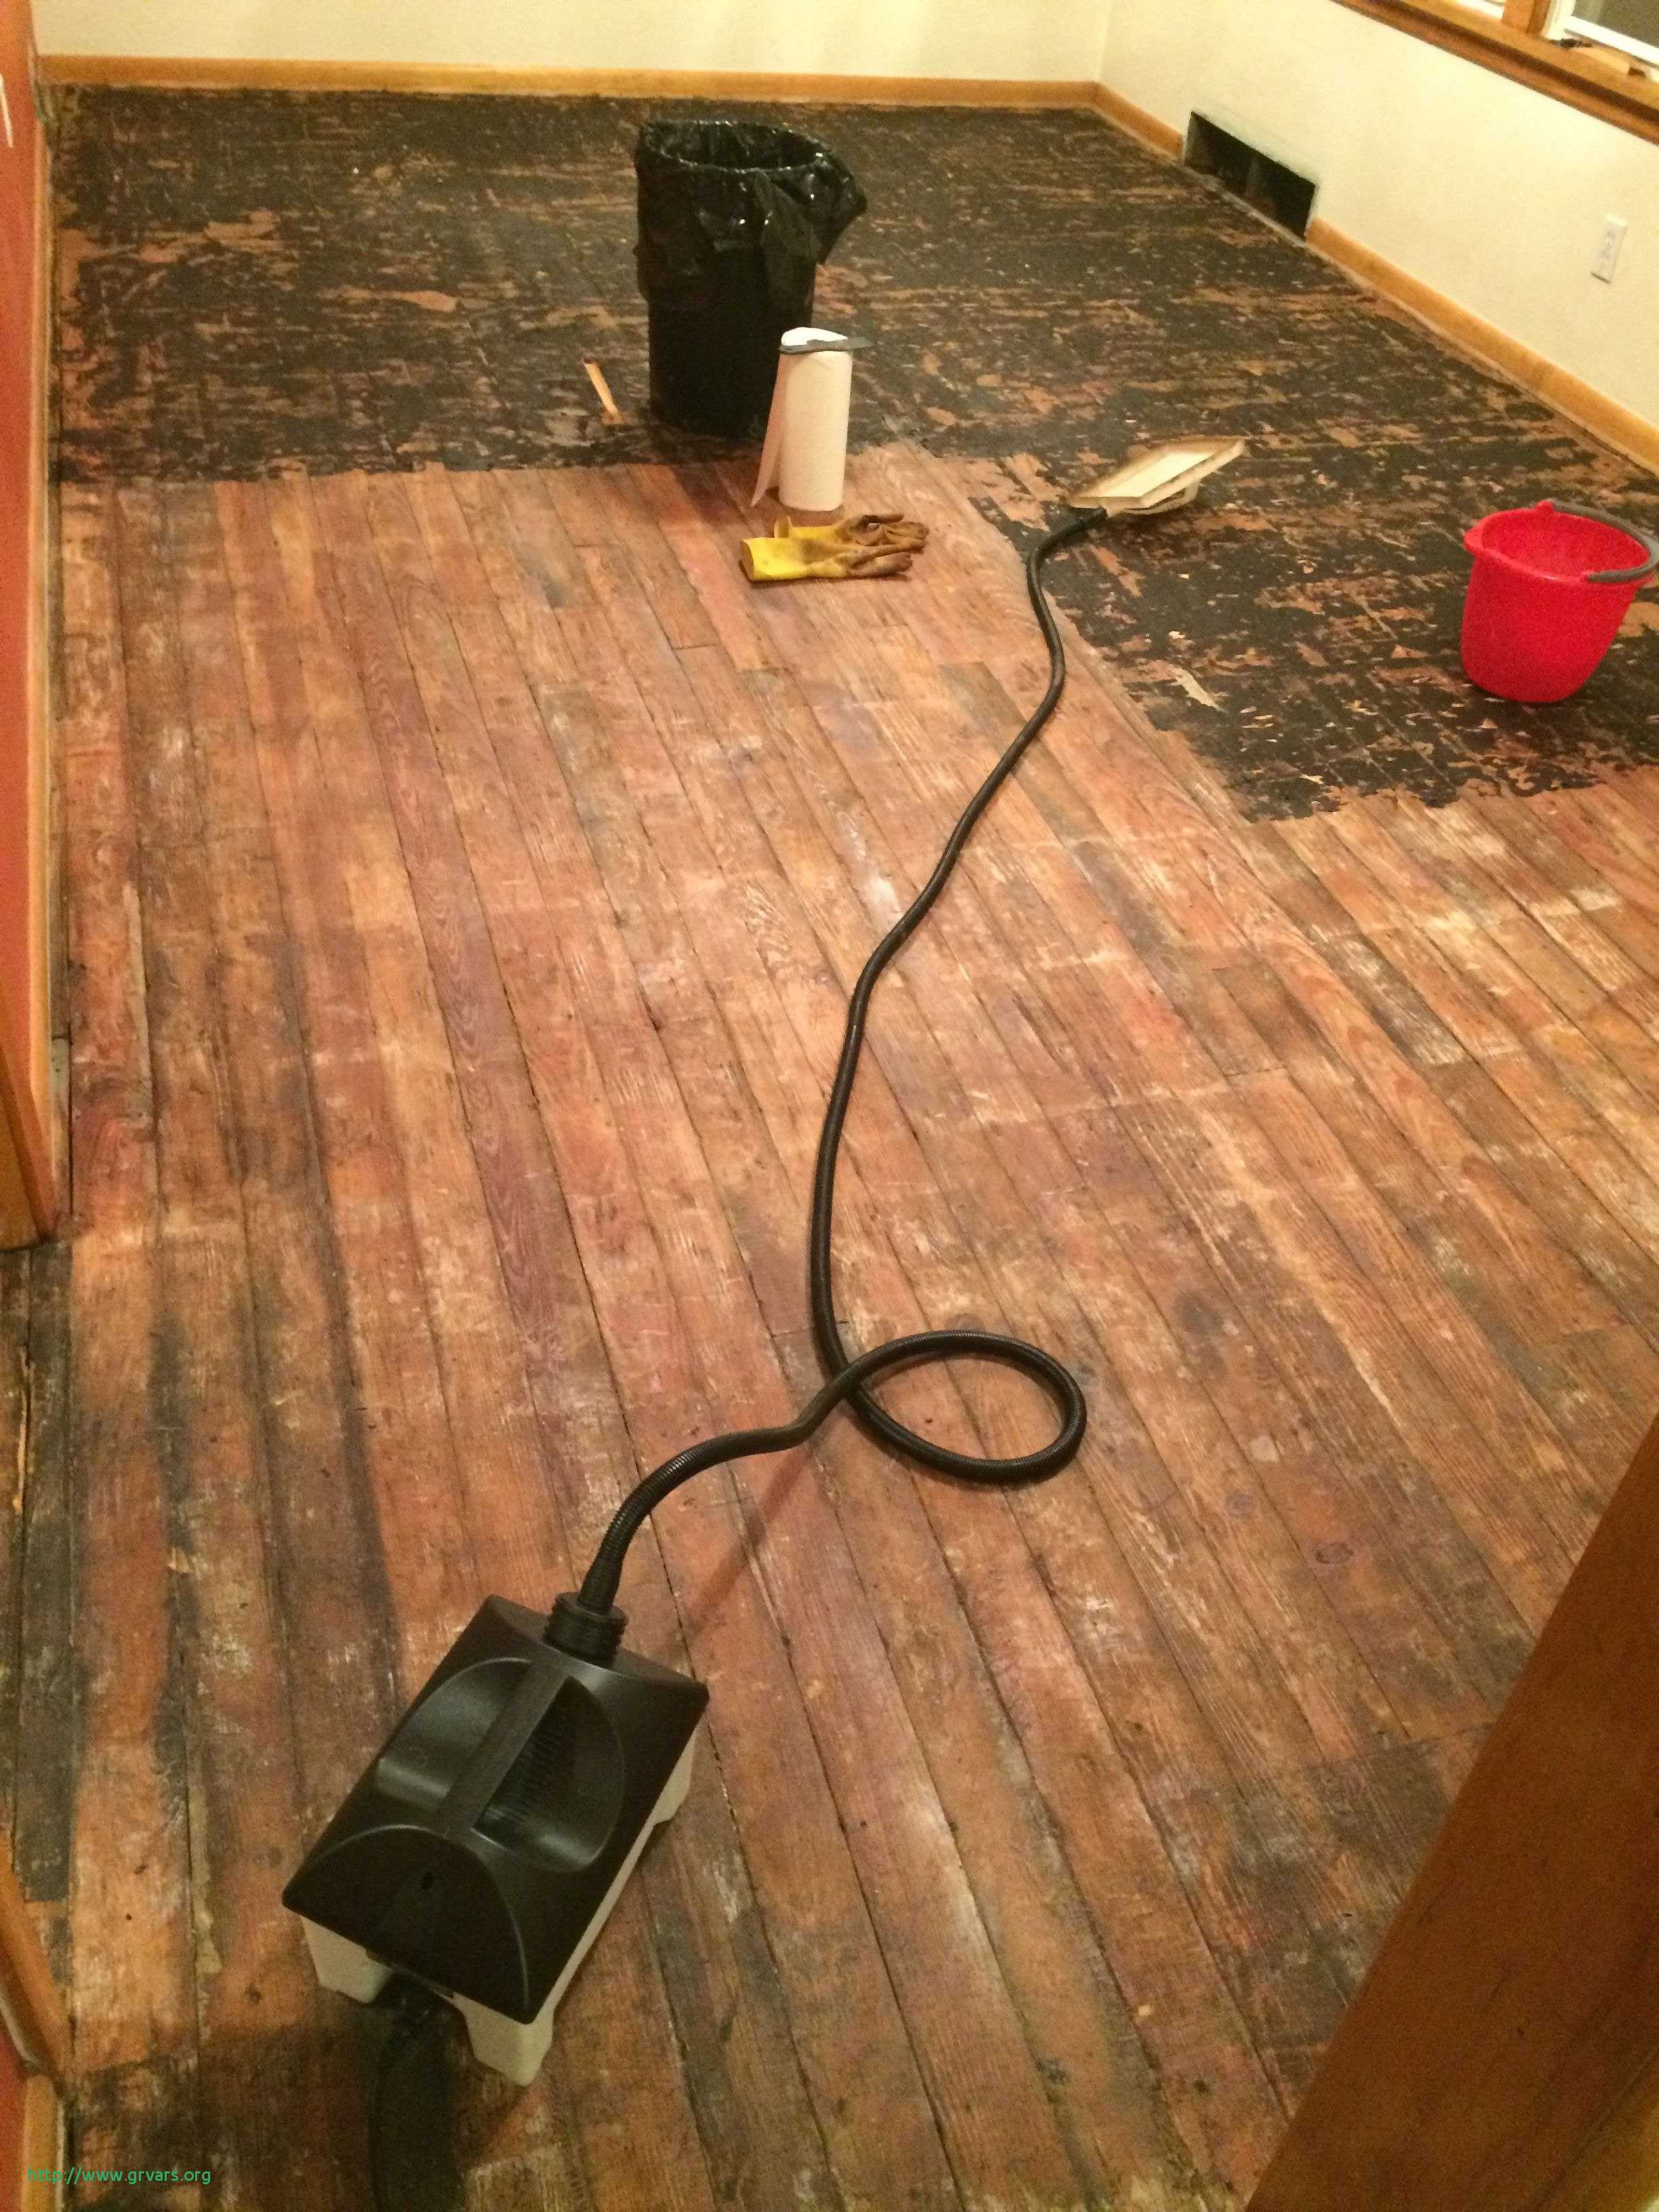 hardwood floor refinishing denver reviews of 16 luxe how to remove carpet adhesive from hardwood floors ideas blog with how to remove carpet adhesive from hardwood floors meilleur de wax hardwood floor removal podemosleganes